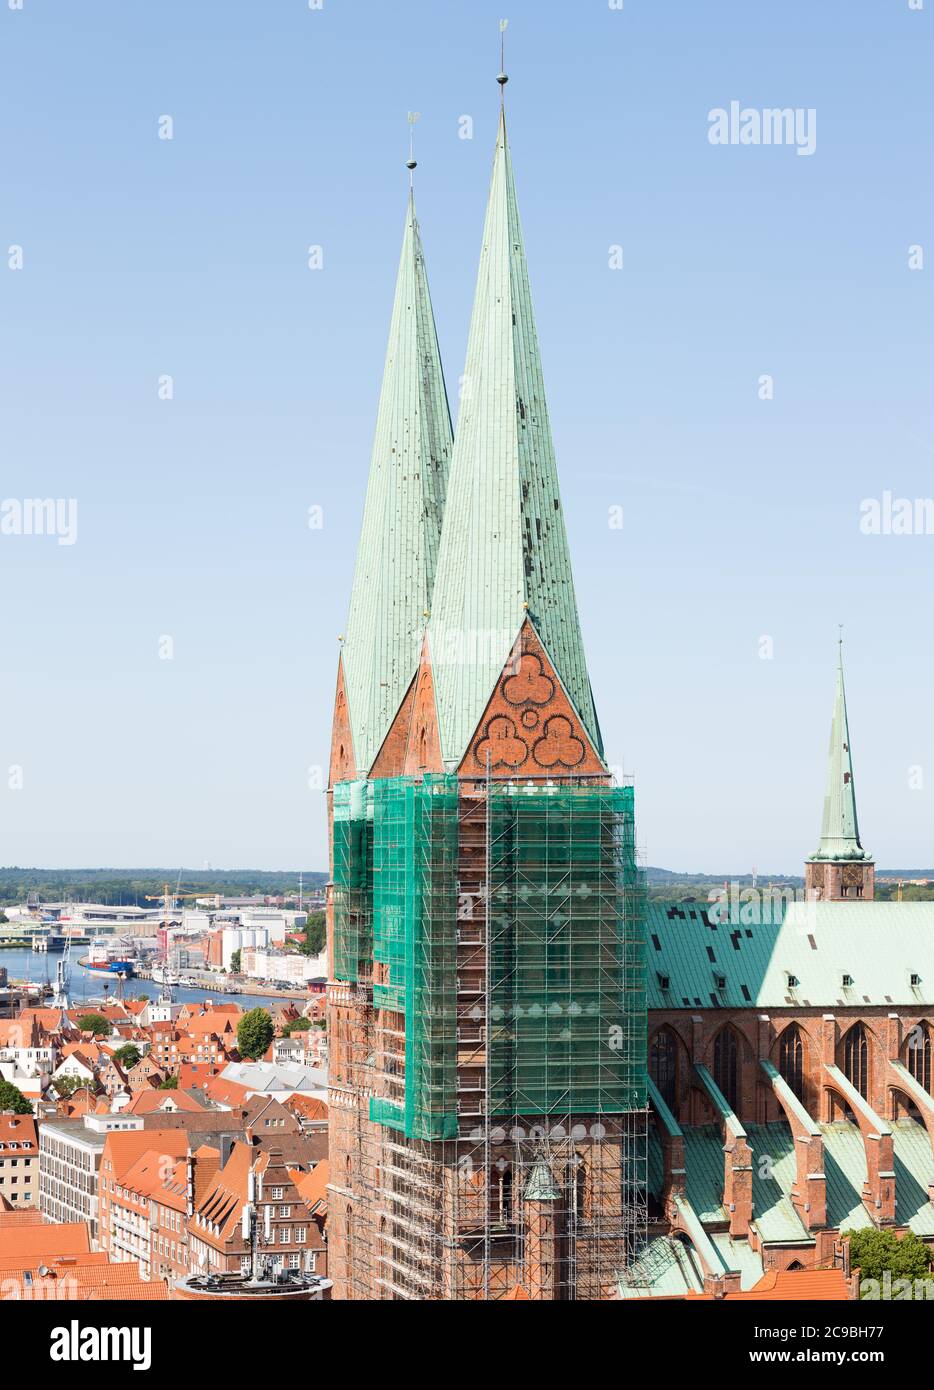 Lübeck, Schleswig-Holstein - June 23, 2020: Close up of the two towers of the Marienkirche. Historical church with scaffolding. Portrait format. Stock Photo